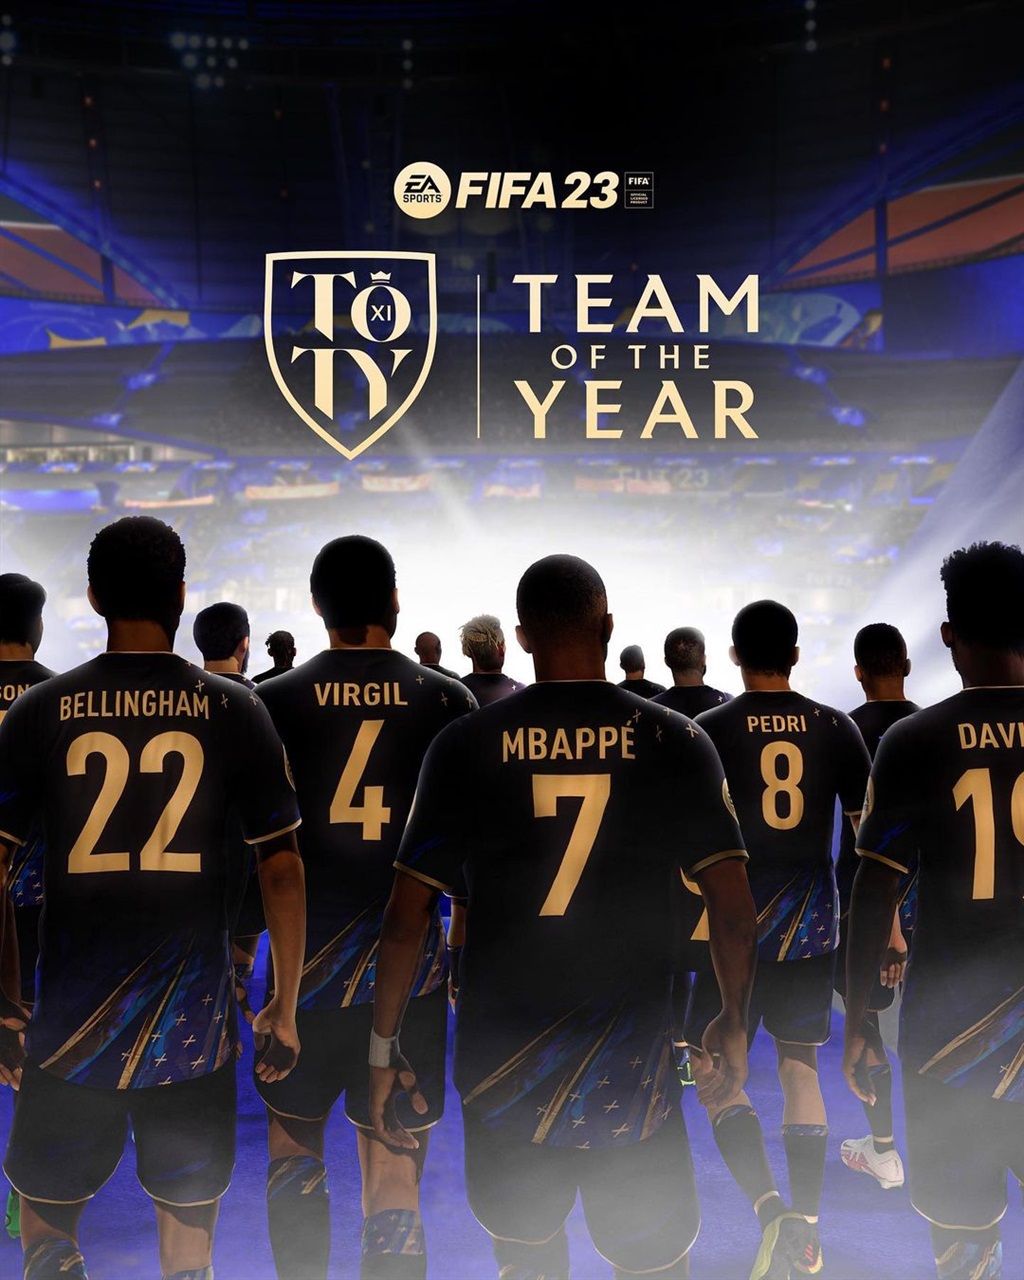 The FIFA 23 Team of the Year has been announced by EA Sports.